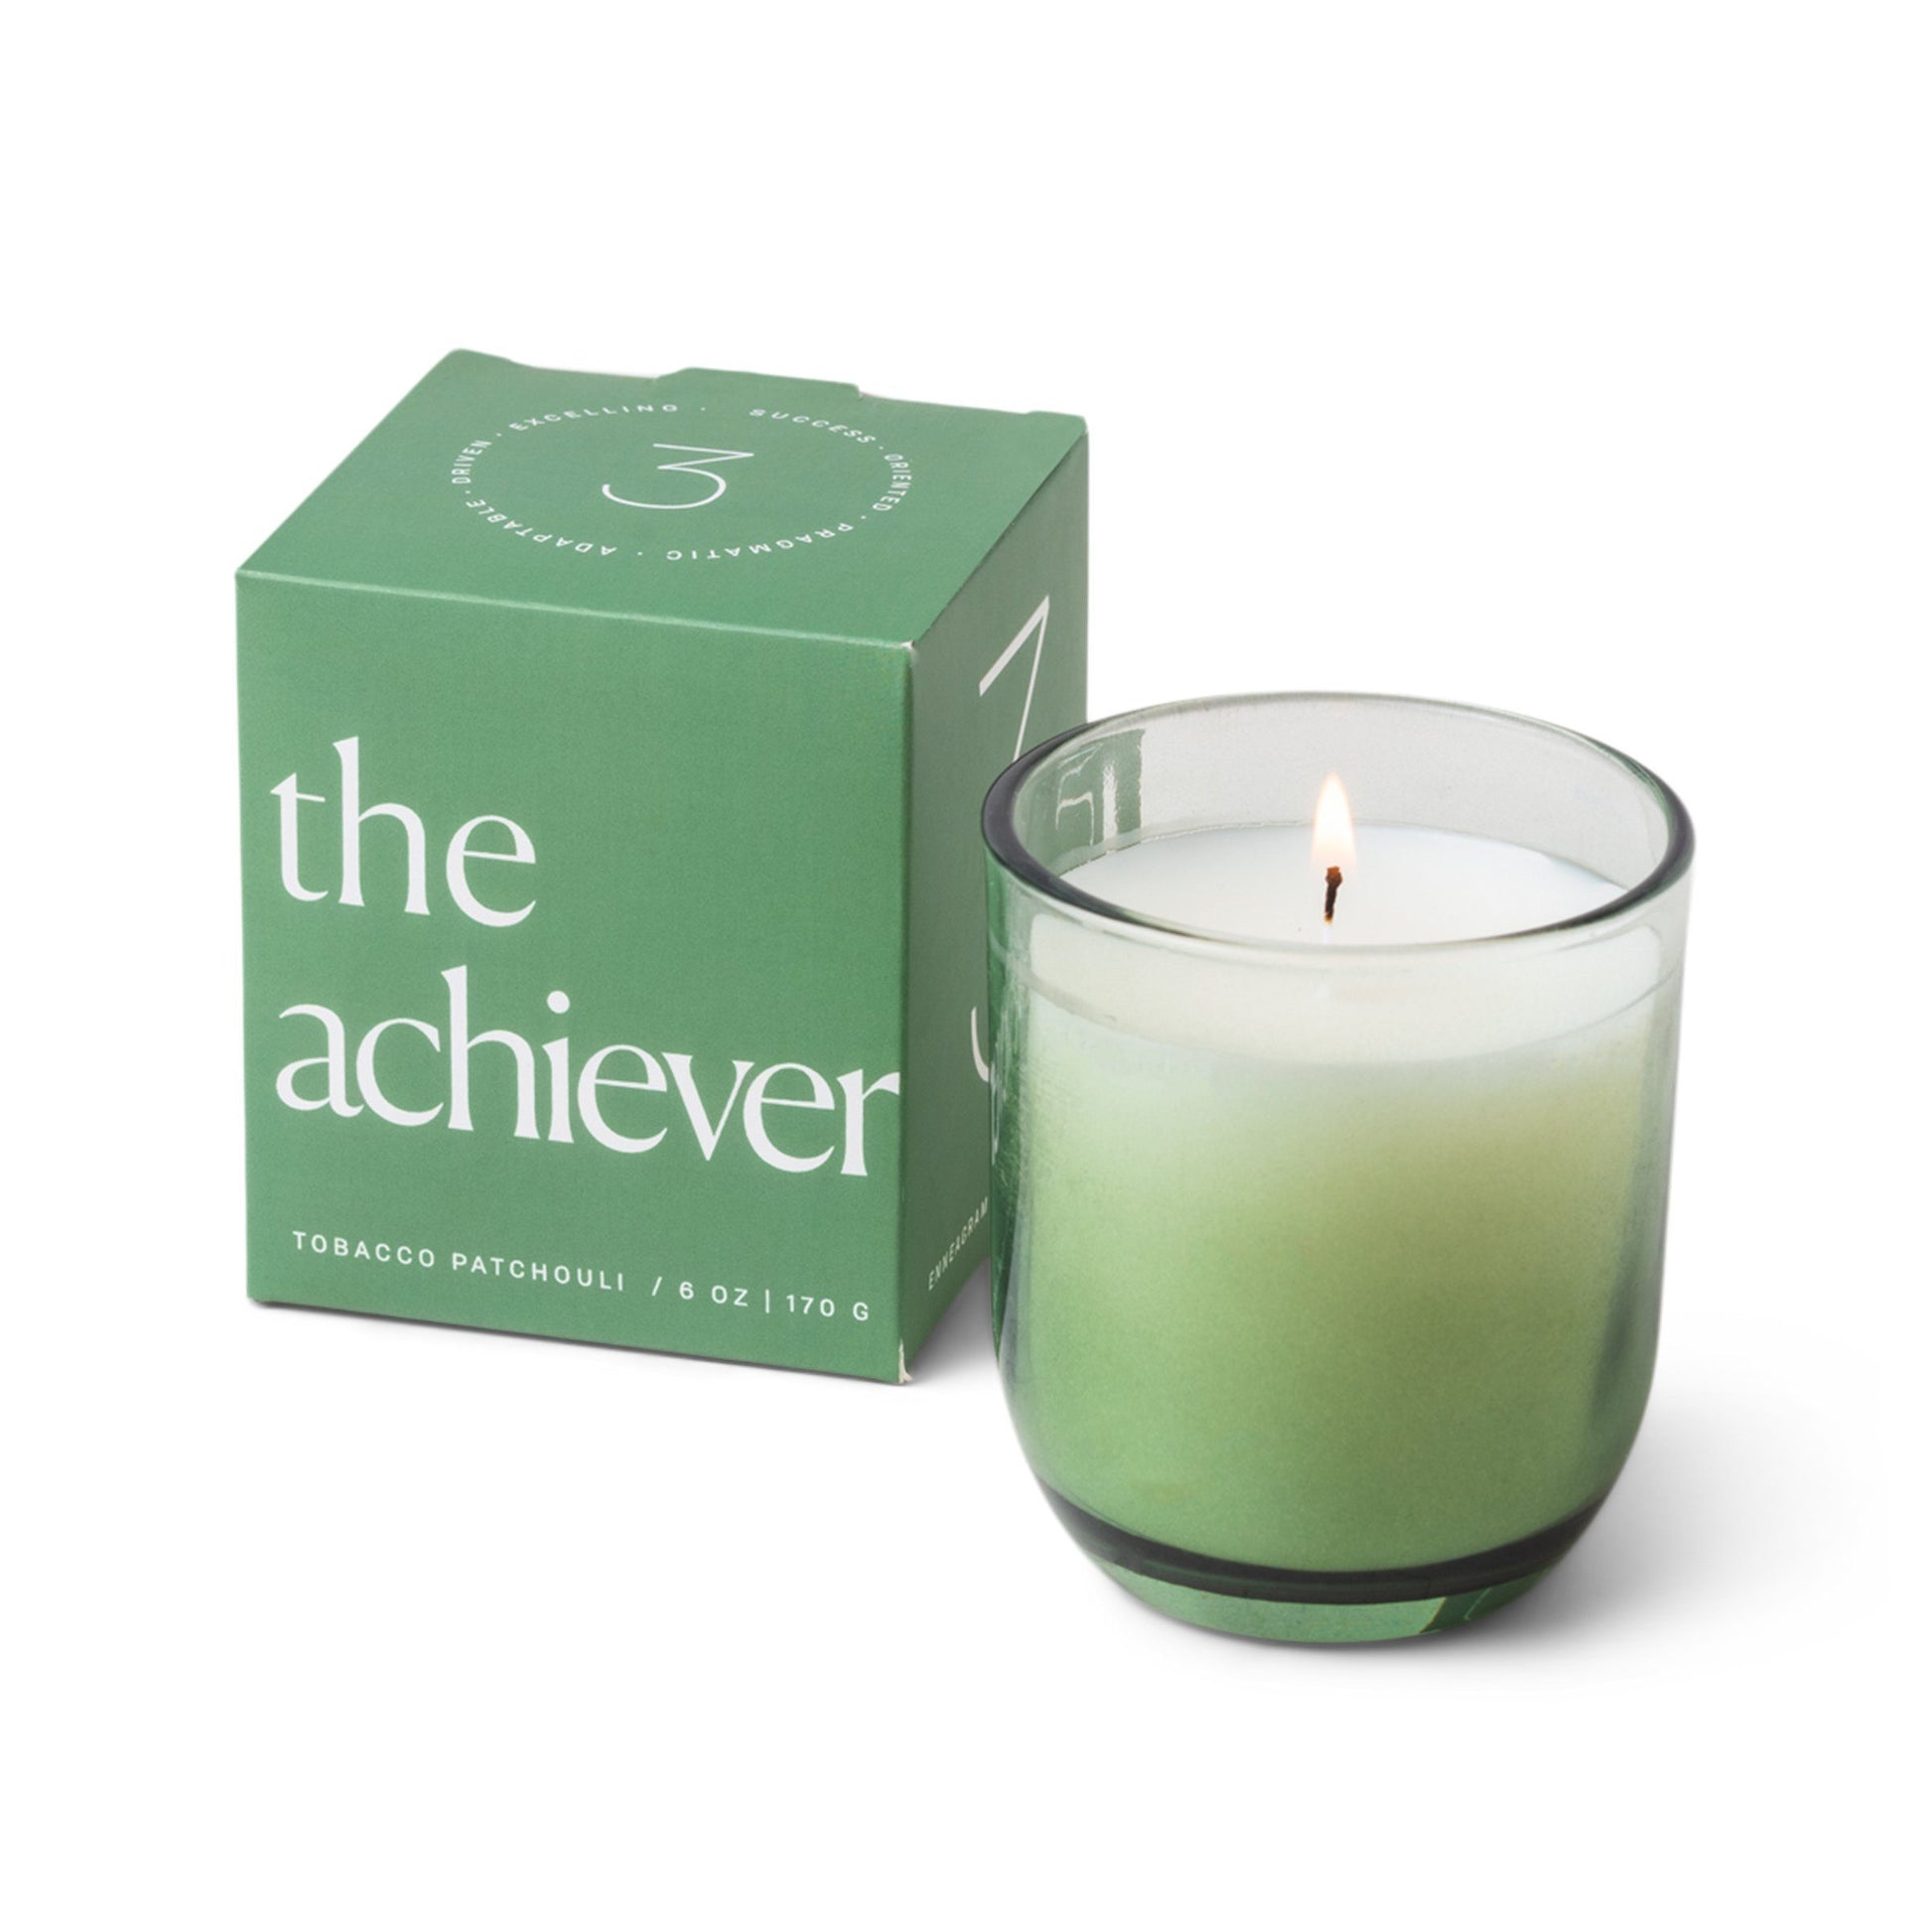 Candle with a vessel of clear glass that fades to green at the bottom; pictured next to the green box which reads “the achiever”